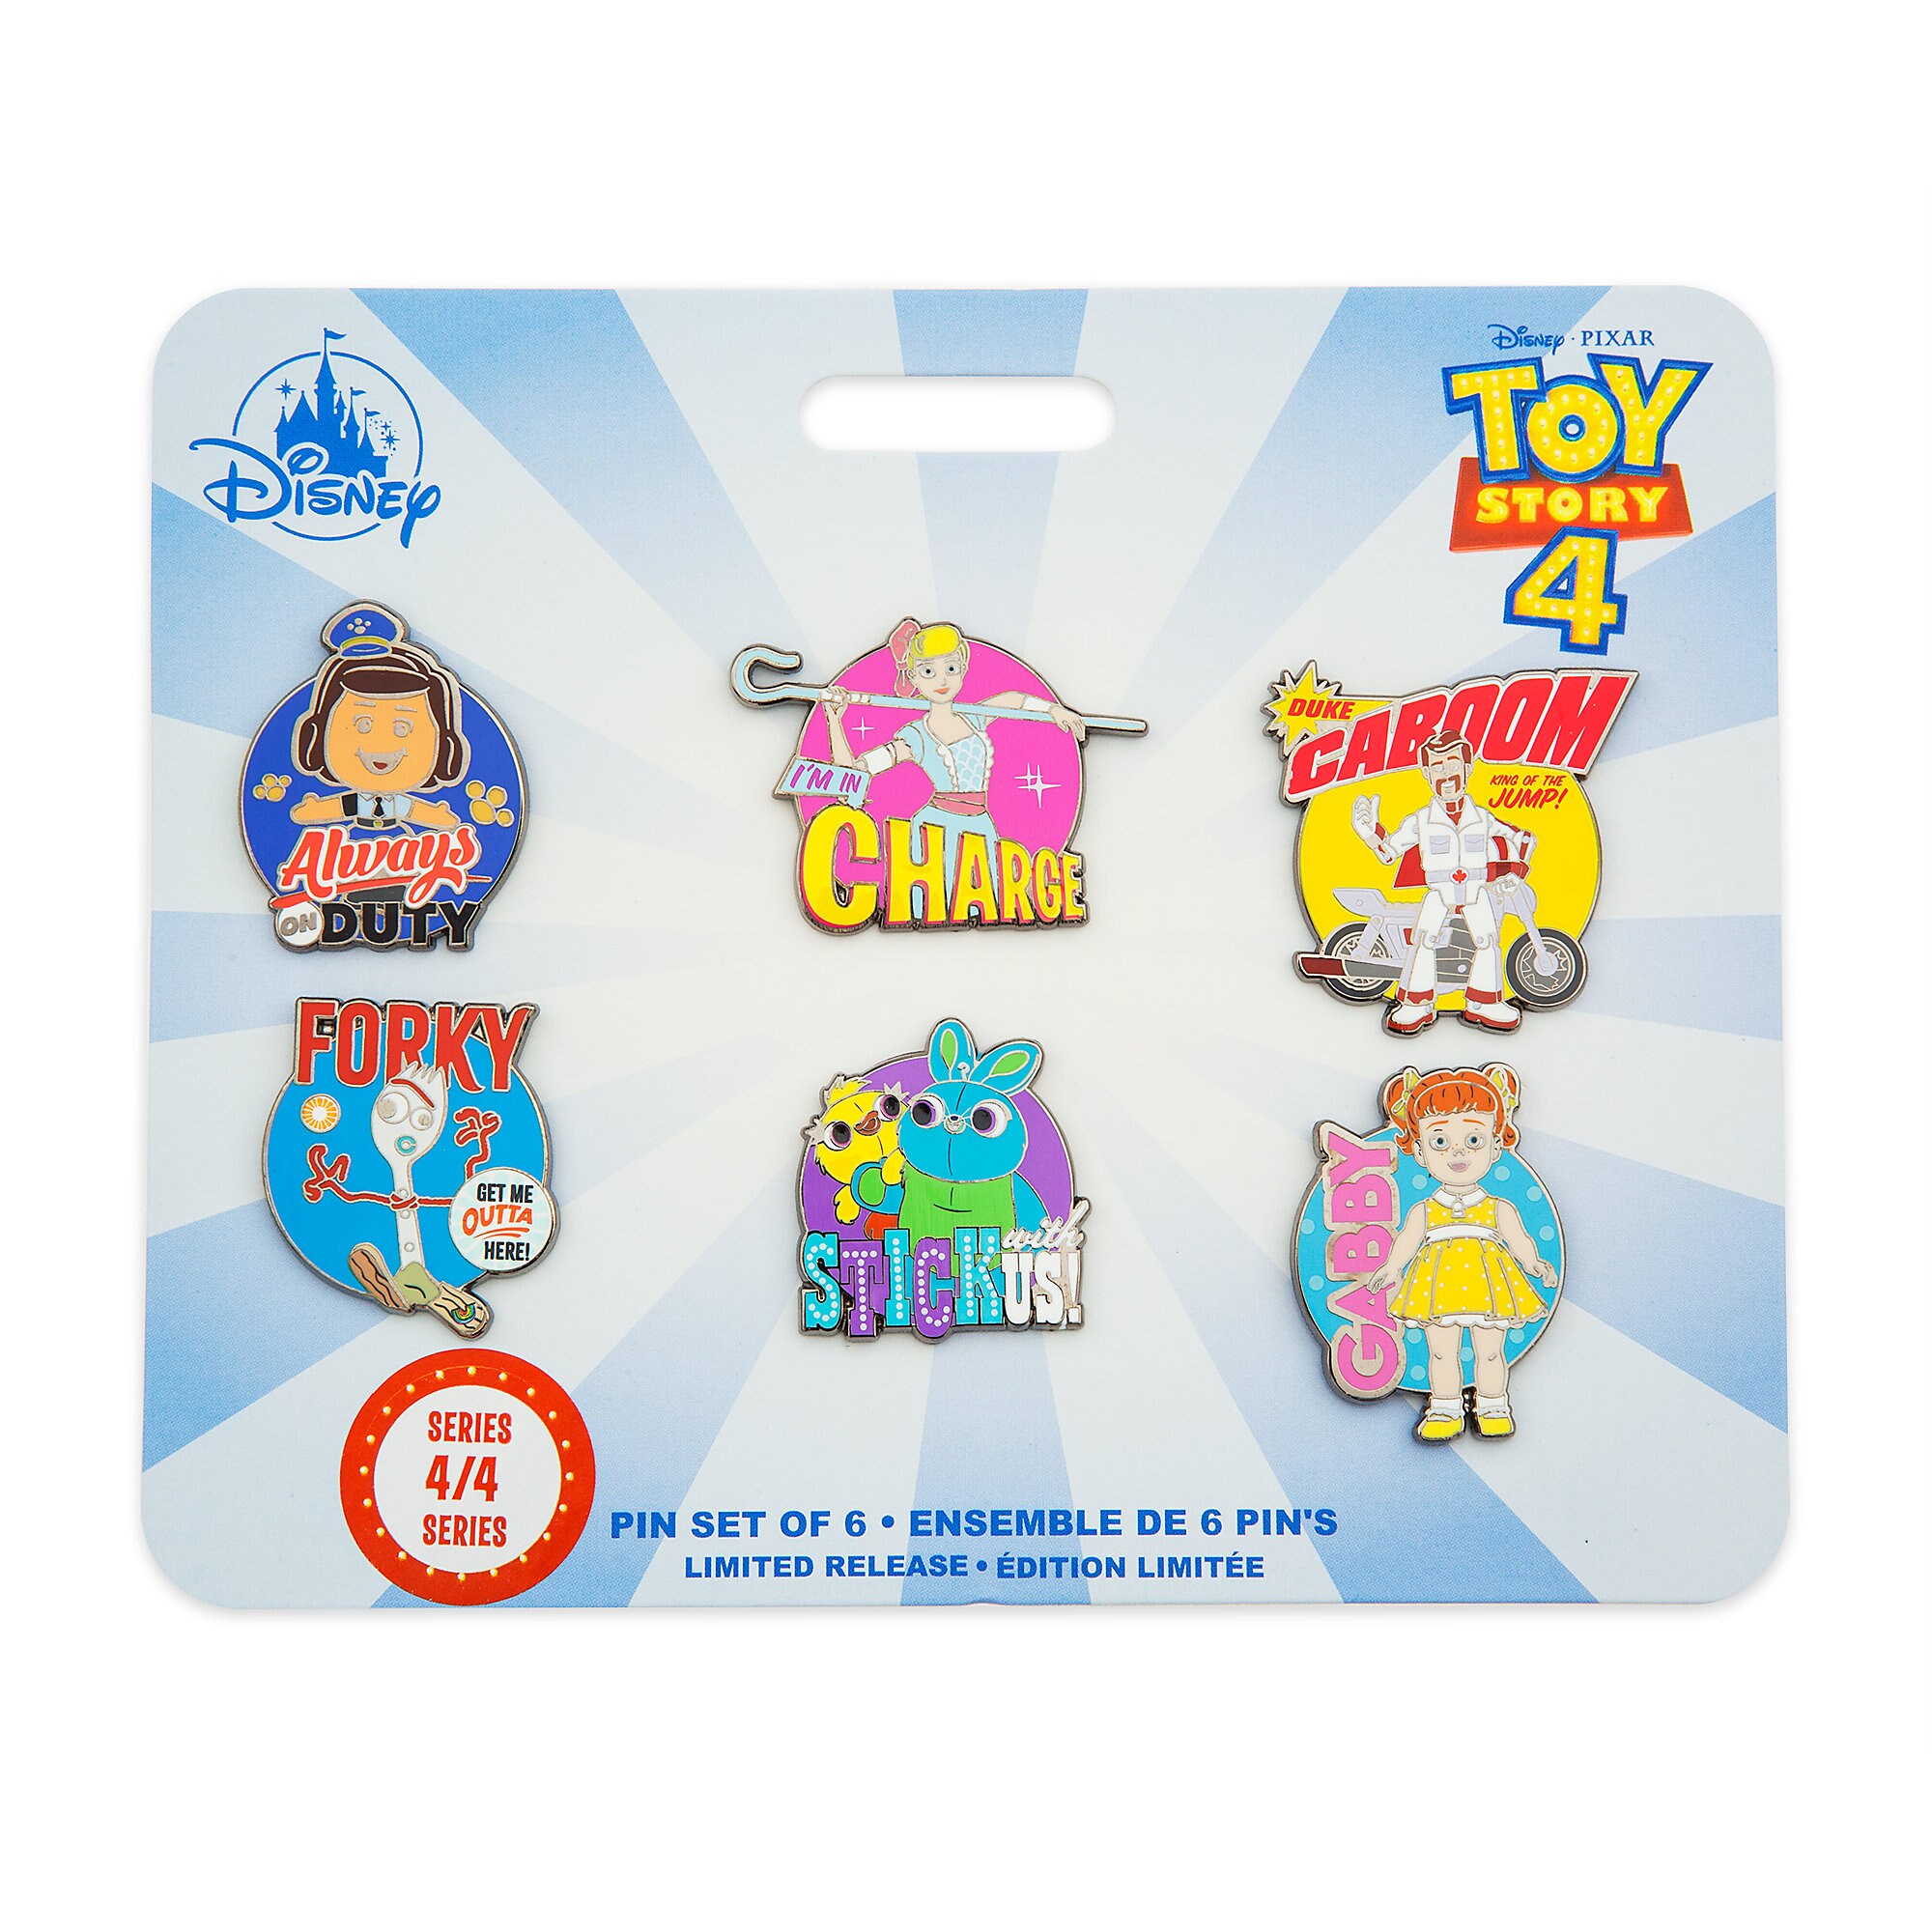 Toy Story 4 Pin Set - Limited Release